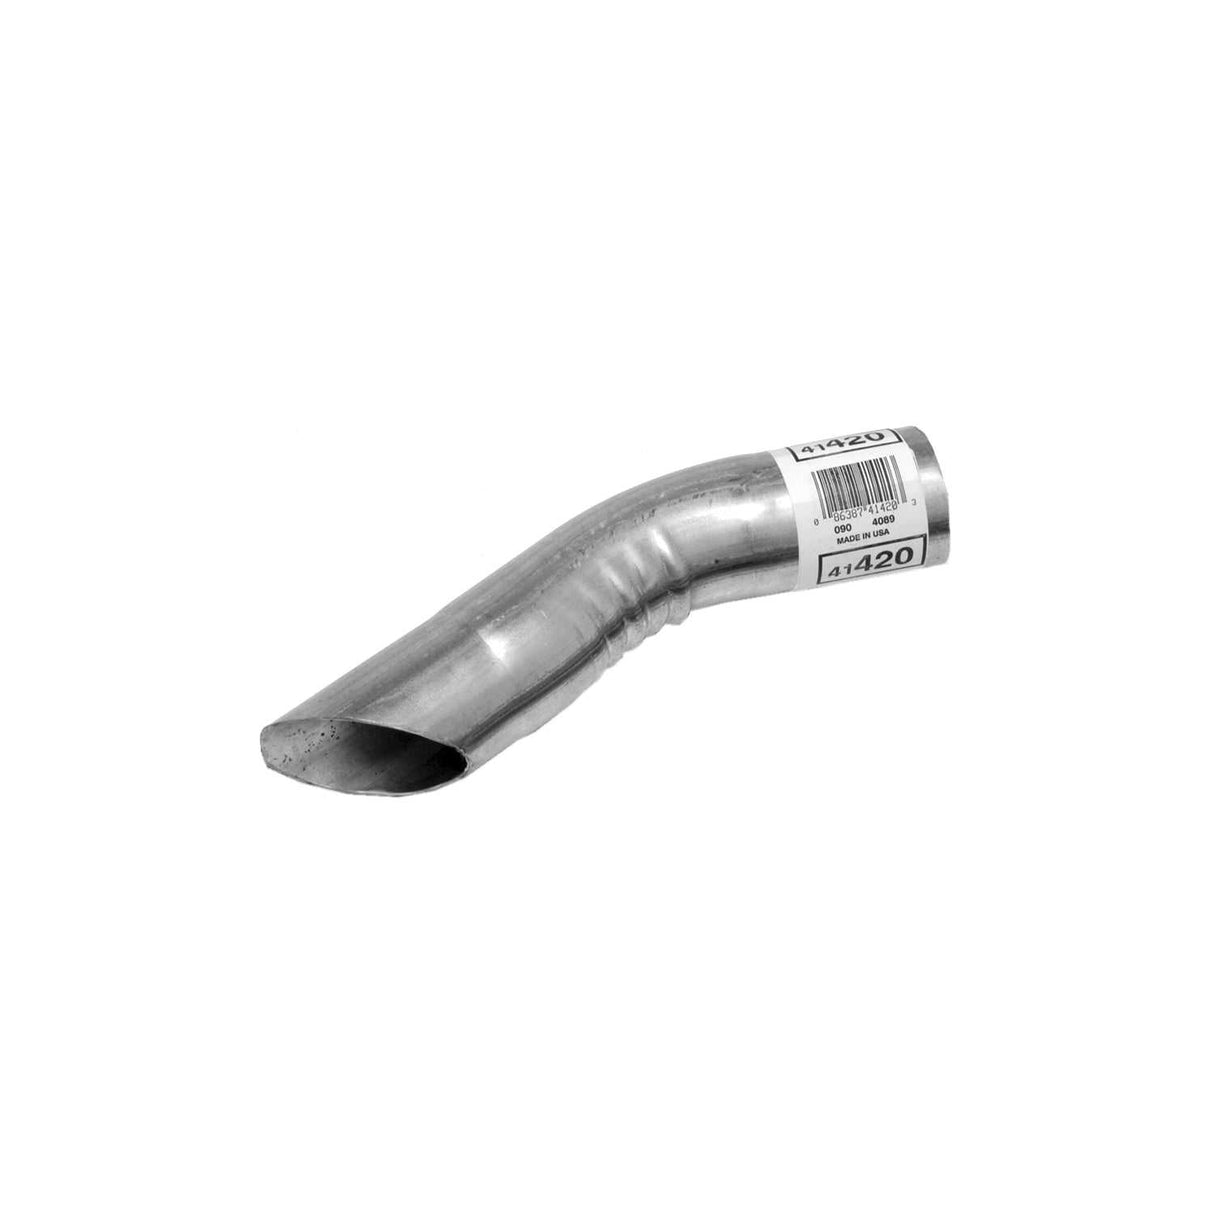 41420 Exhaust Tail Pipe